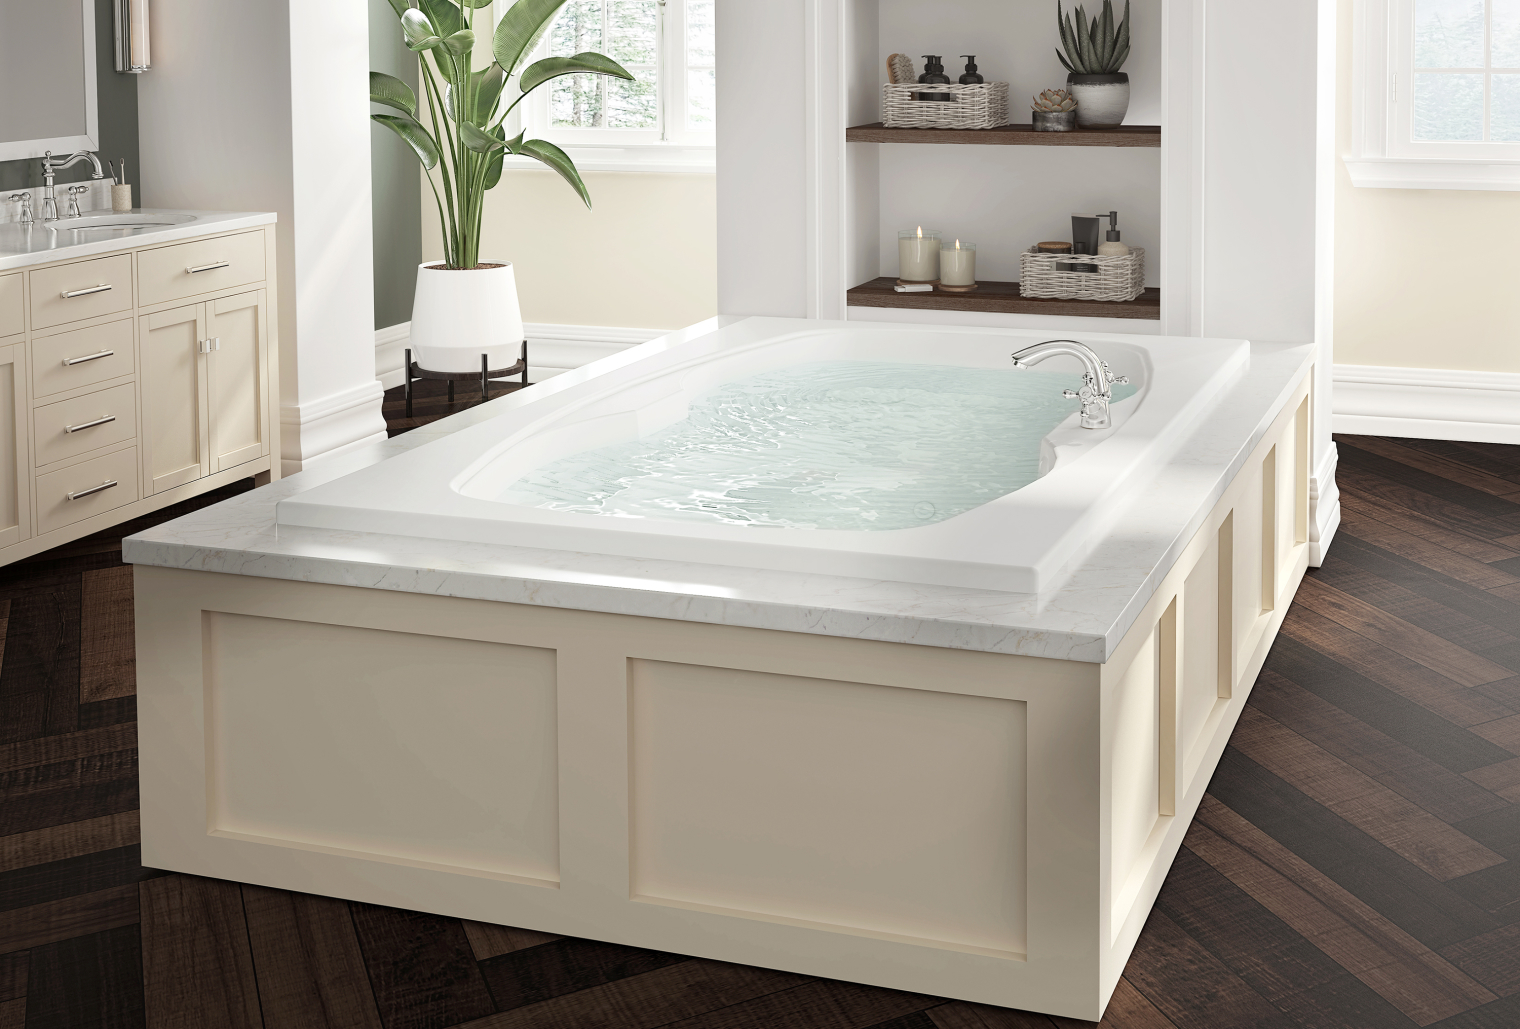 Large soaking tub as a drop-in.